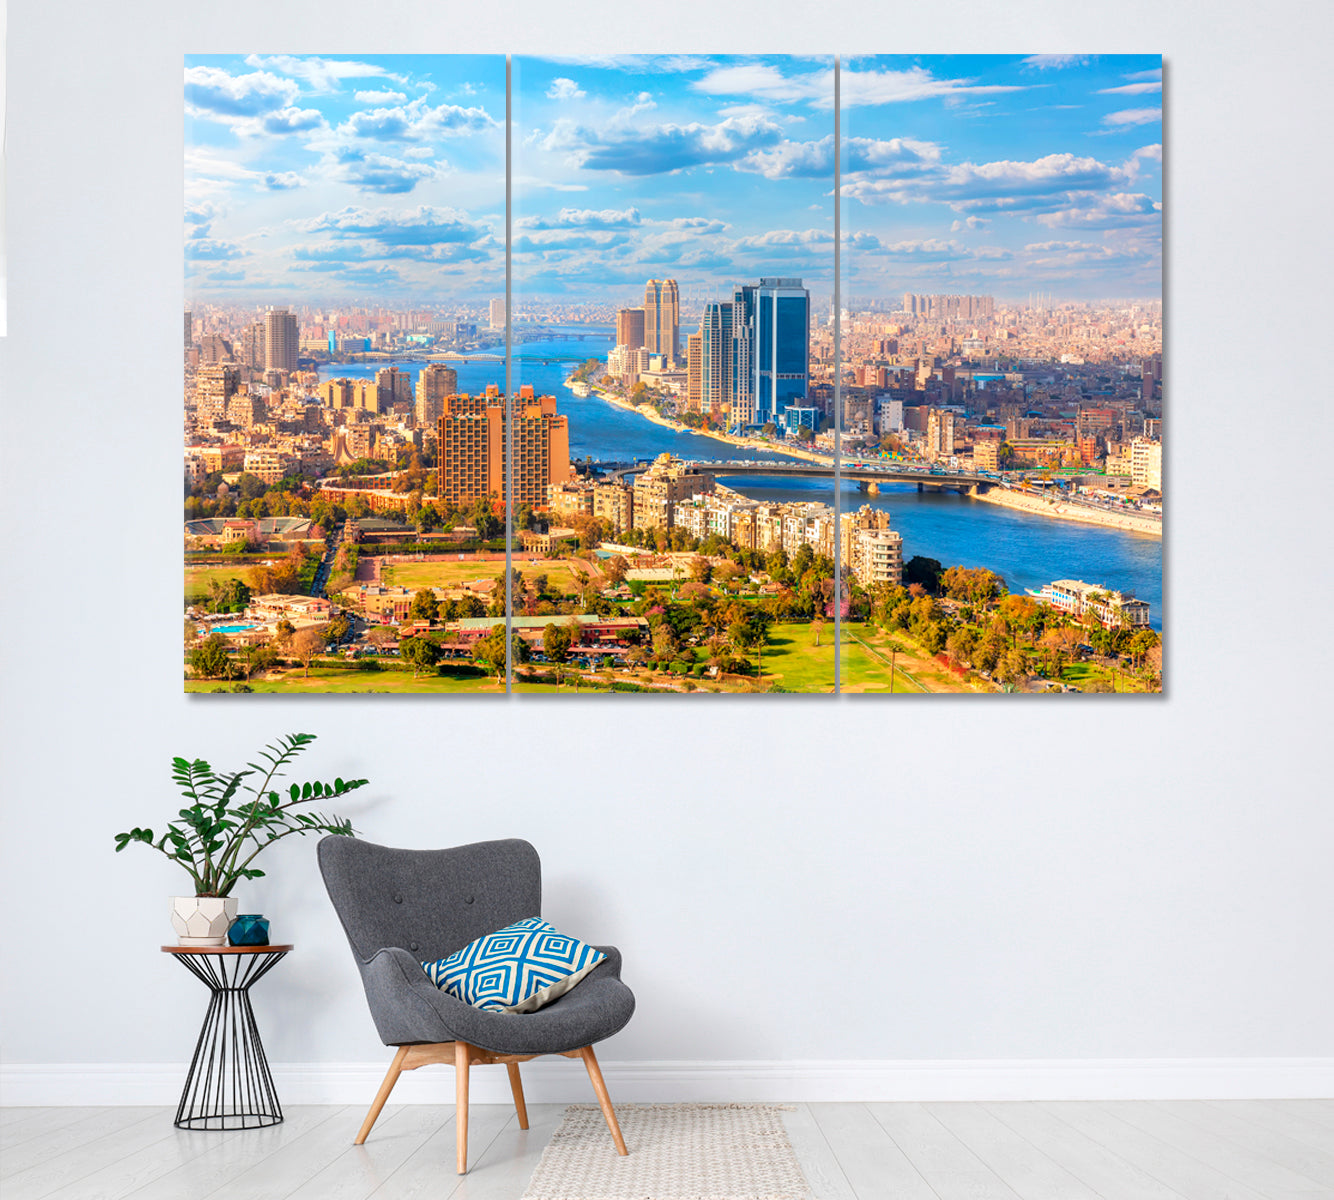 Cairo and Nile Egypt Canvas Print ArtLexy 3 Panels 36"x24" inches 